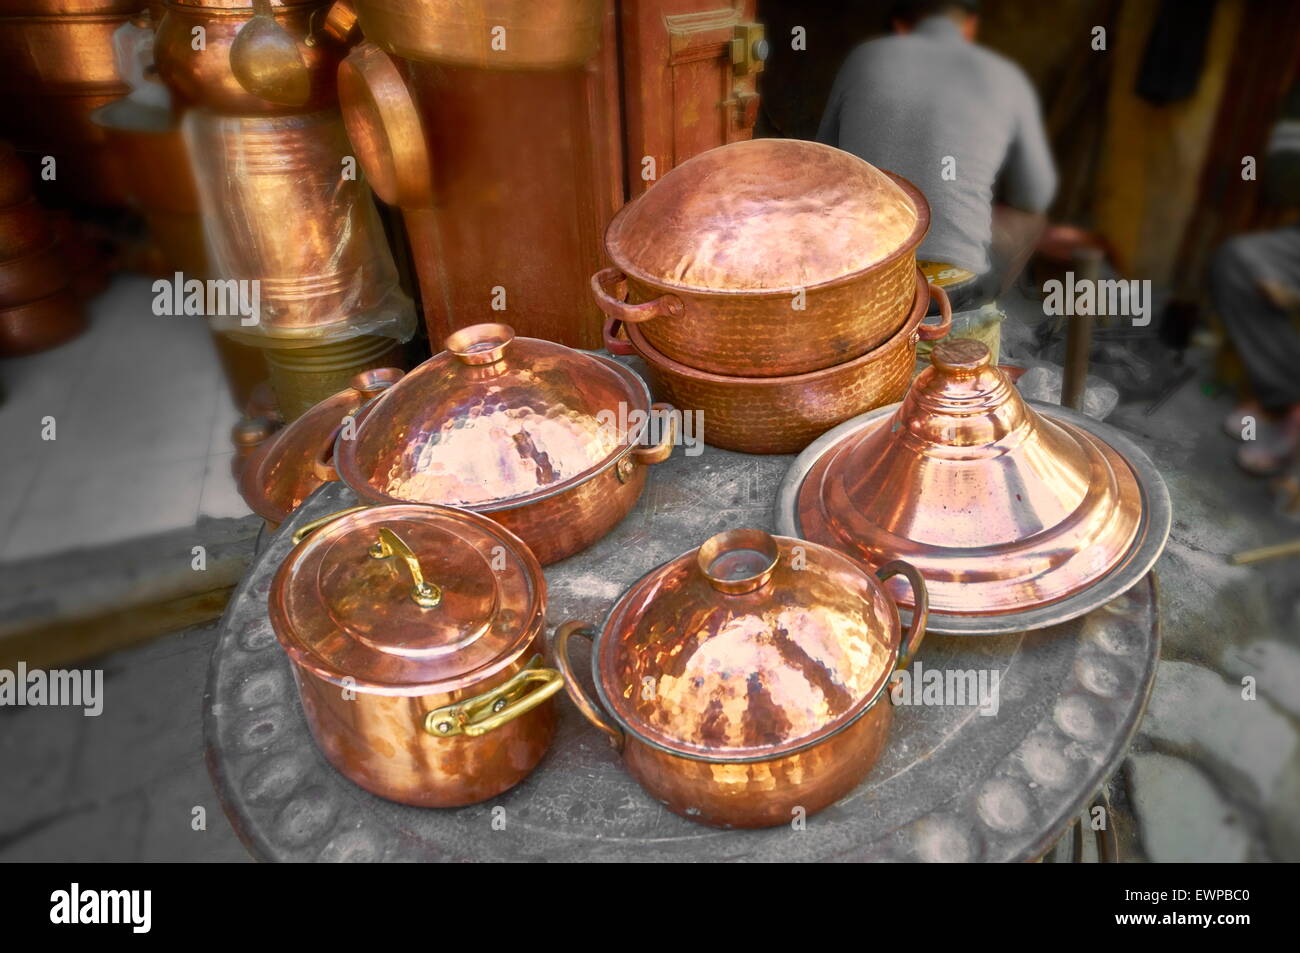 Fez Medina - Metalworkers workshops in the Place el Seffarine, Morocco, Africa Stock Photo